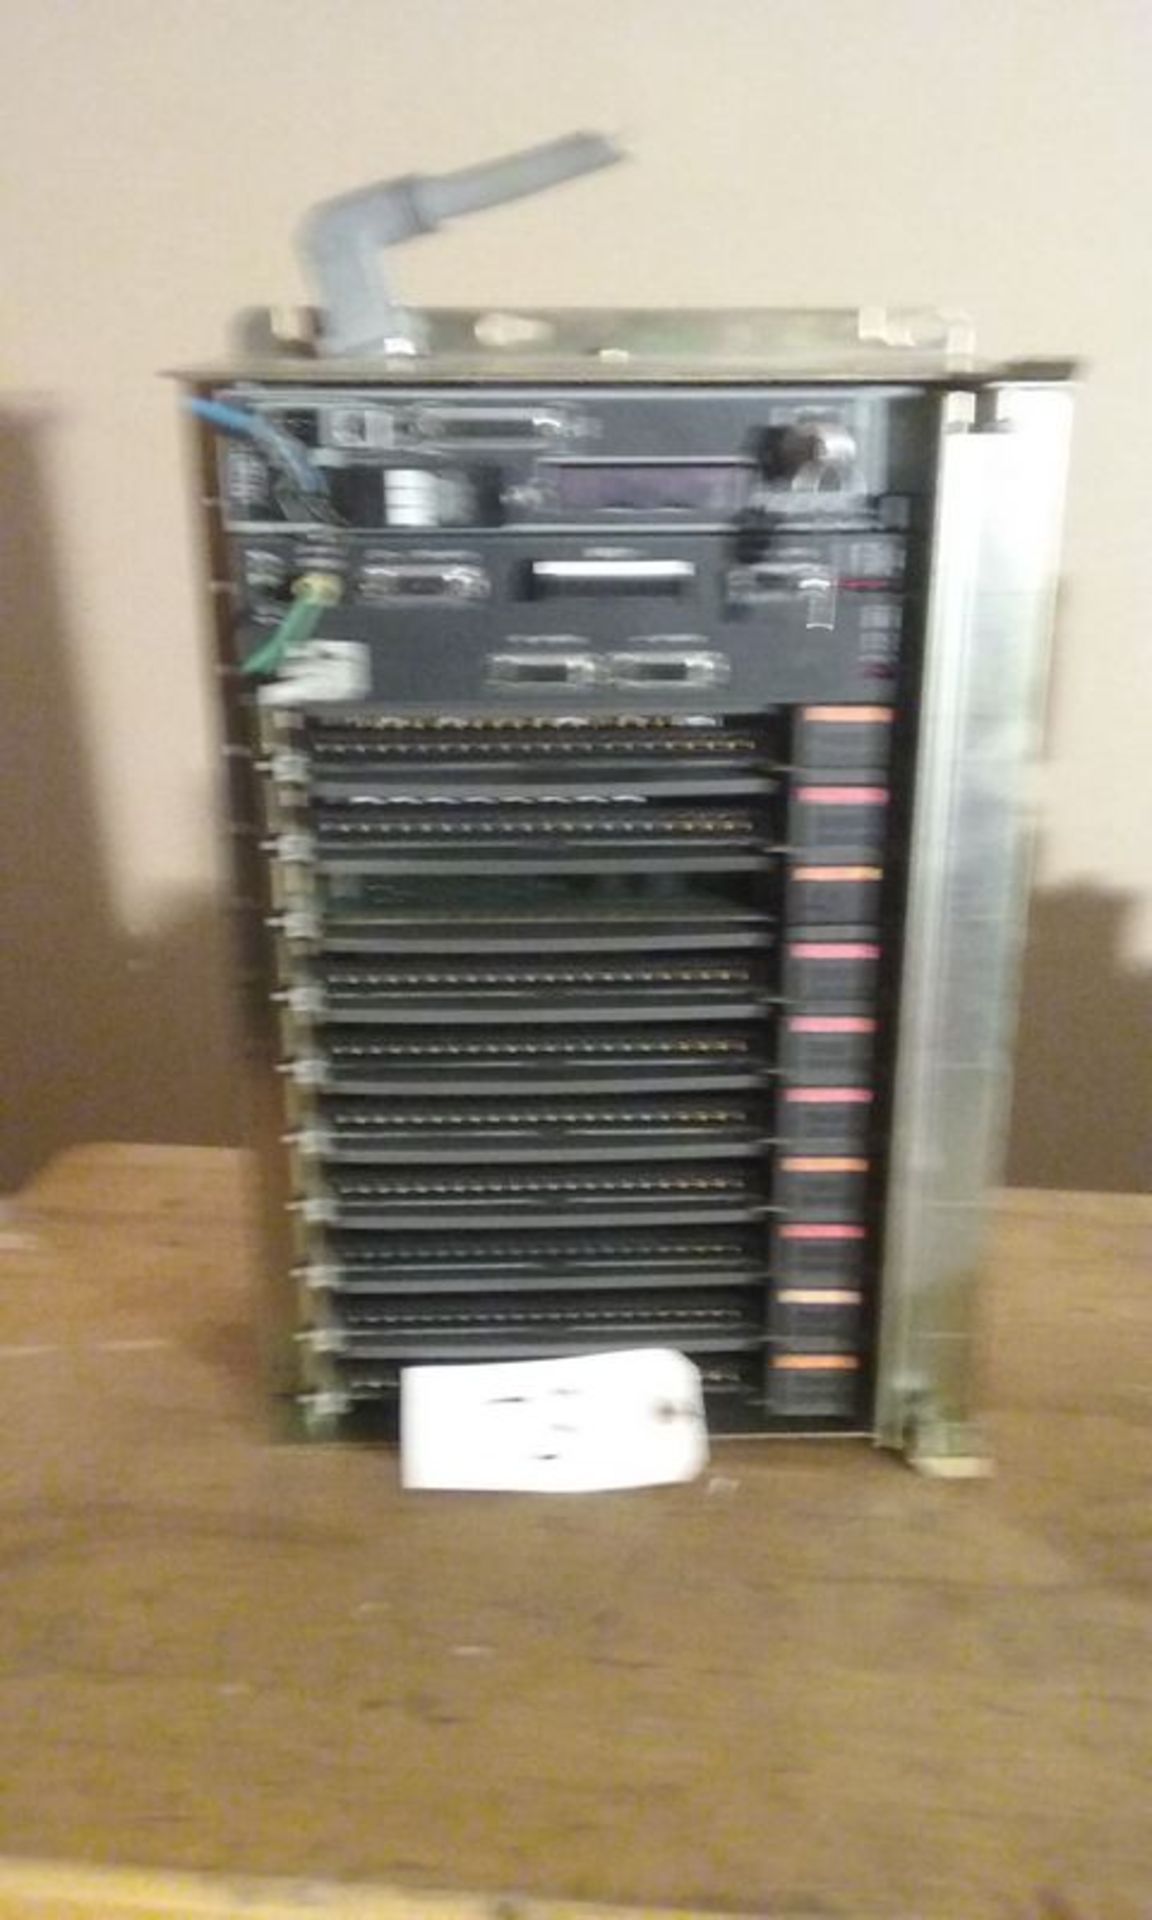 ALLEN BRADLEY 1771-A3B1C, 12-SLOT CHASSIS W/ CARDS & POWER SOURCE - Image 2 of 6